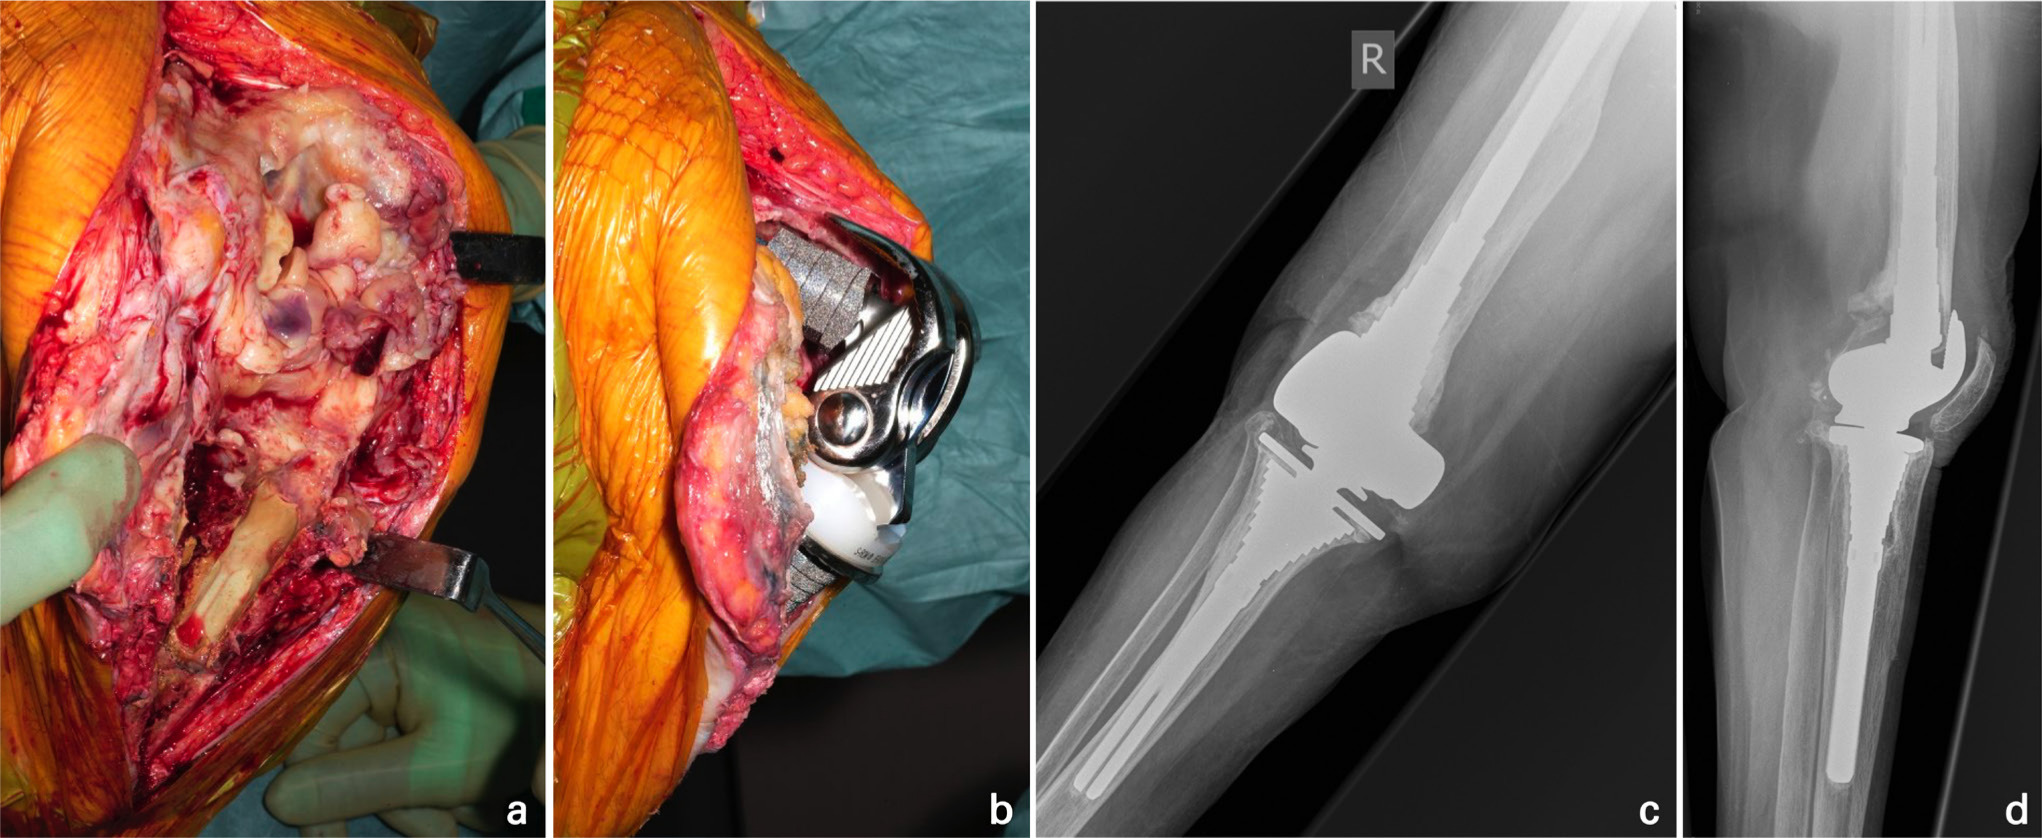 Fig. 1 
            a) Intraoperative clinical photographs demonstrate an extensile approach—incorporating a tibial crest osteotomy (TCO)—to explant an infected complex primary total knee arthroplasty in a 76-year-old female, revealing extensive biofilm. b) Following debridement, cementless reimplantation was undertaken with a hinged prosthesis, as the collateral ligaments were unsalvageable. c) Anteroposterior and d) lateral right knee radiographs at four years postoperatively show the TCO has healed and the components appear well-fixed.
          